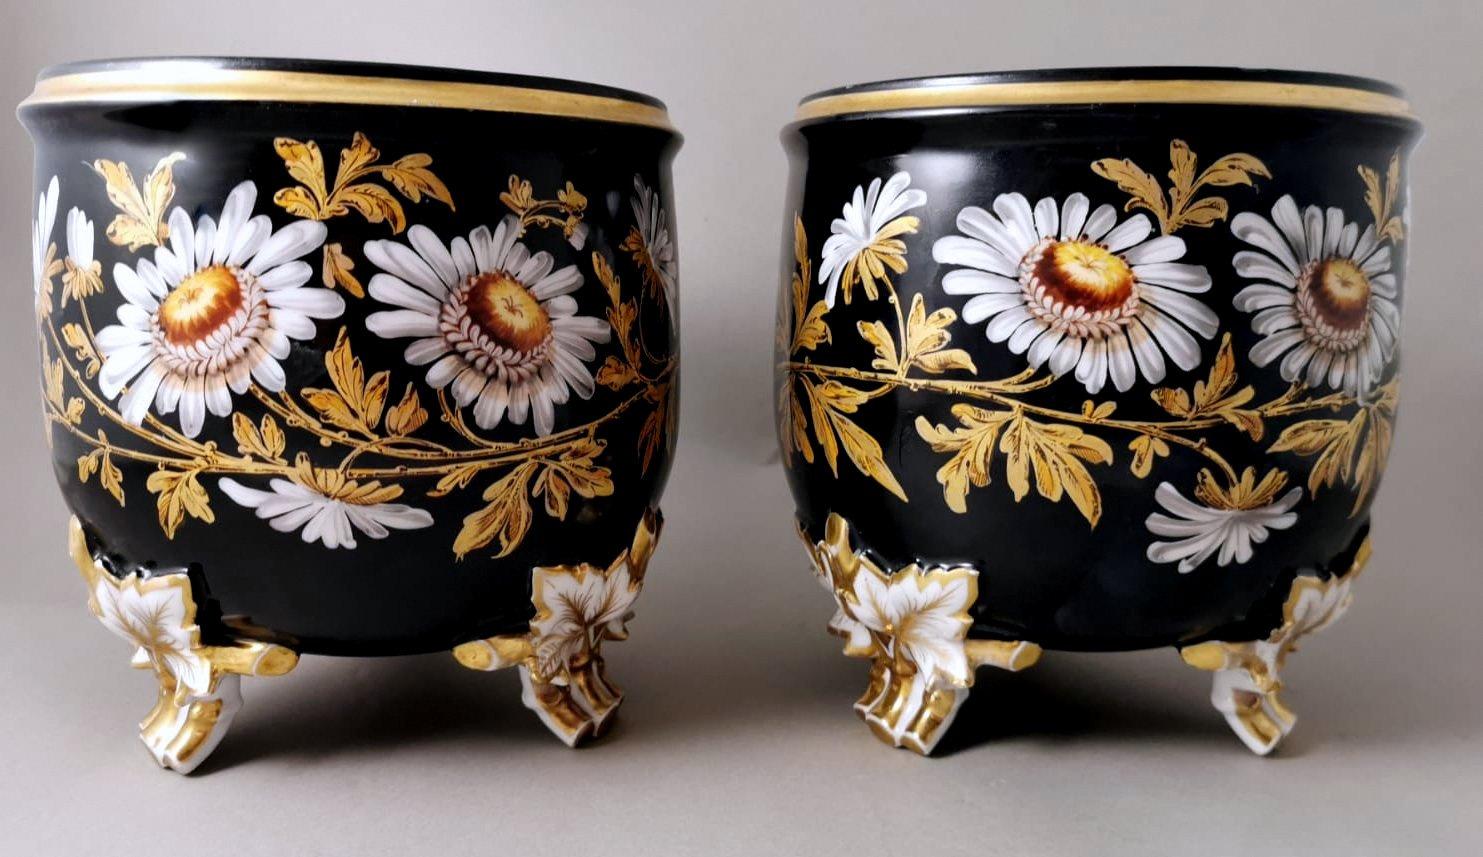 We kindly suggest that you read the whole description, as with it we try to give you detailed technical and historical information to guarantee the authenticity of our objects. Elegant and fine pair of cachepots made of fine French porcelain 